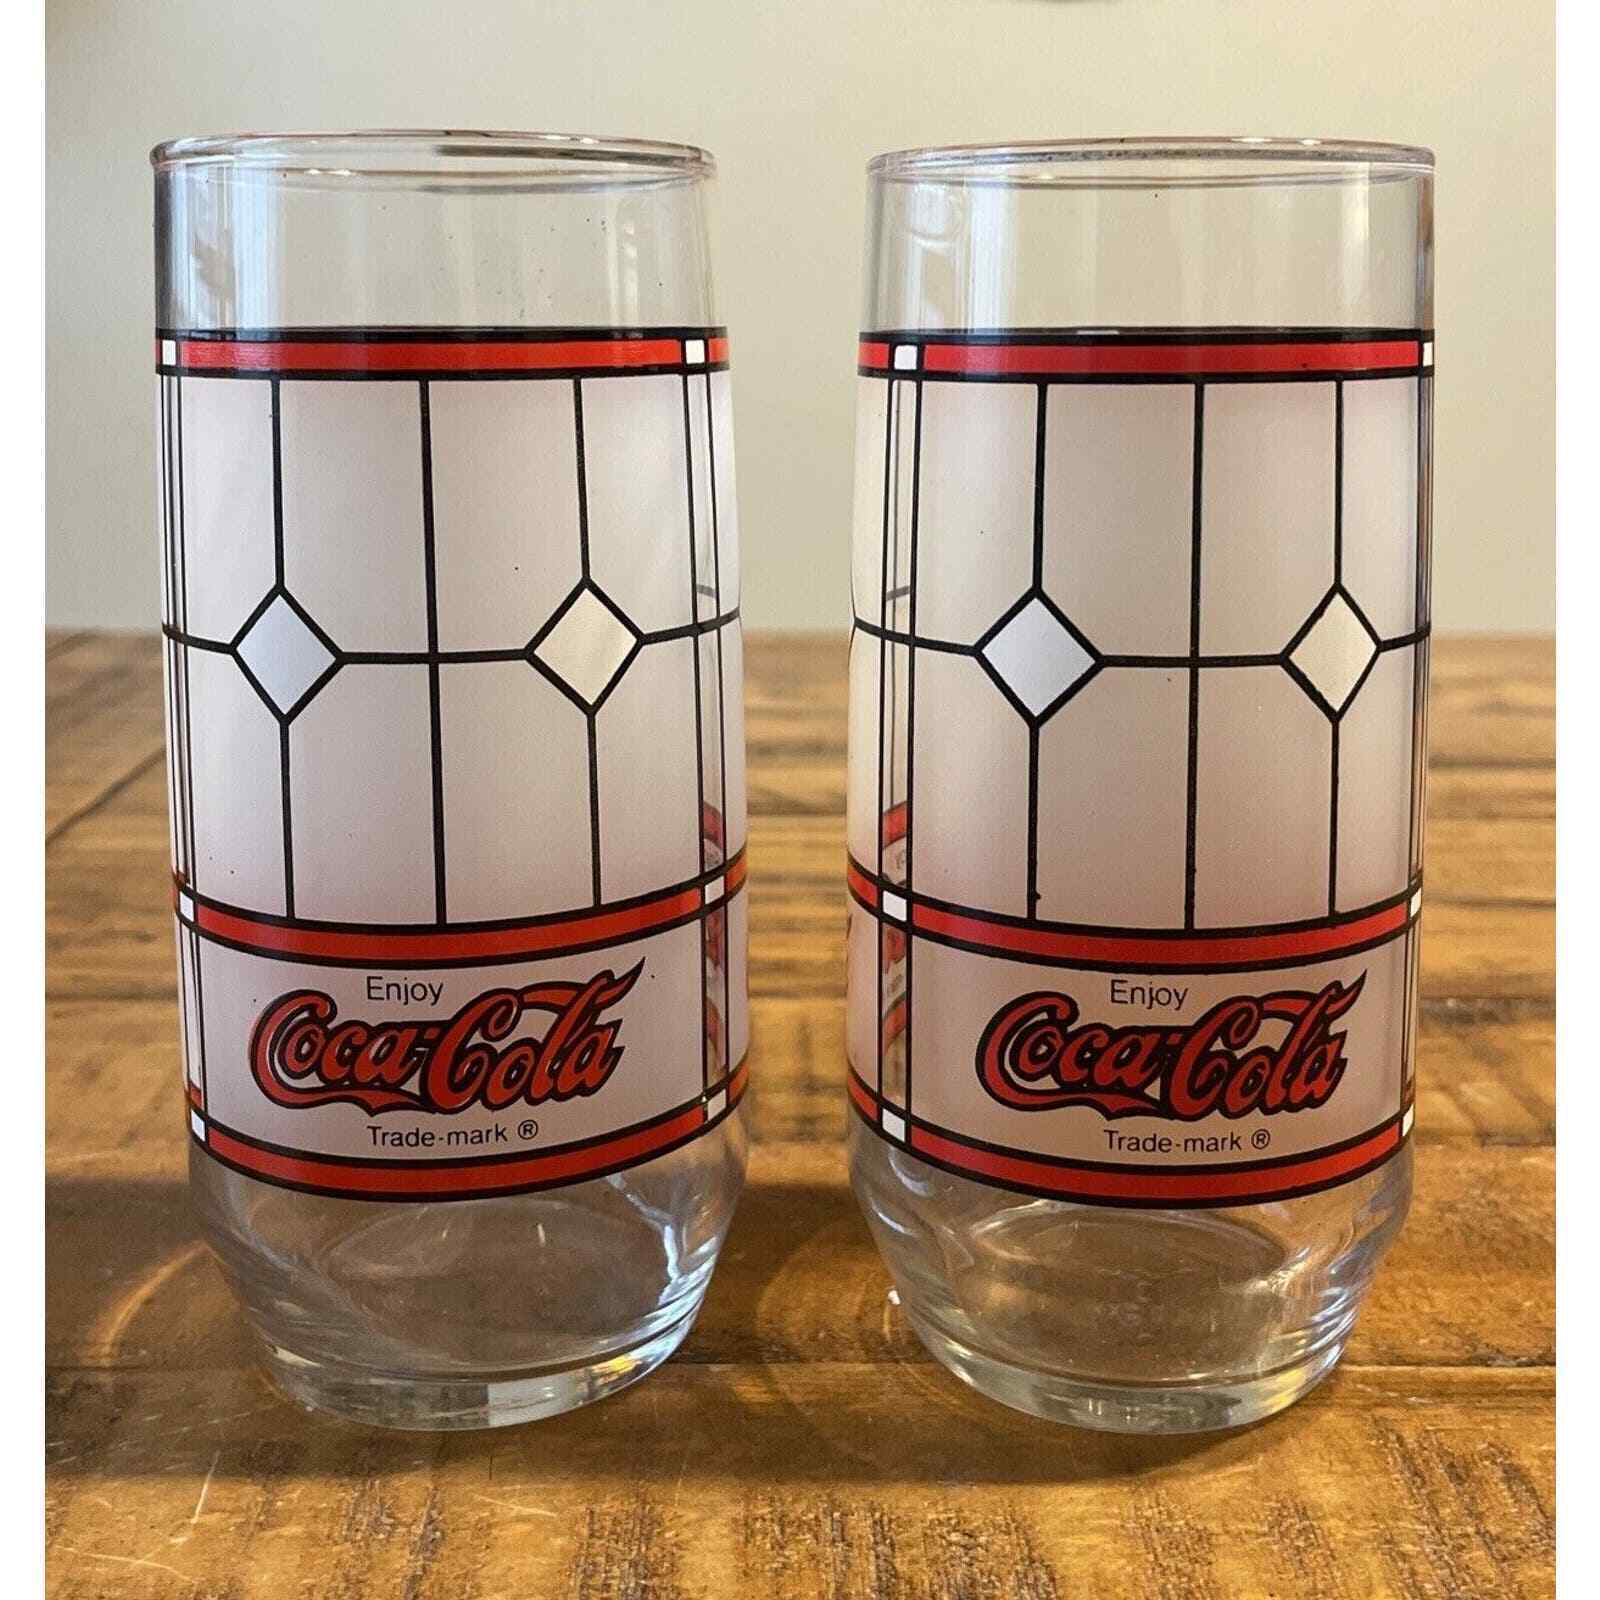 Coca-cola glass red and white stained glass design vintage set of 2. Mint Cond.